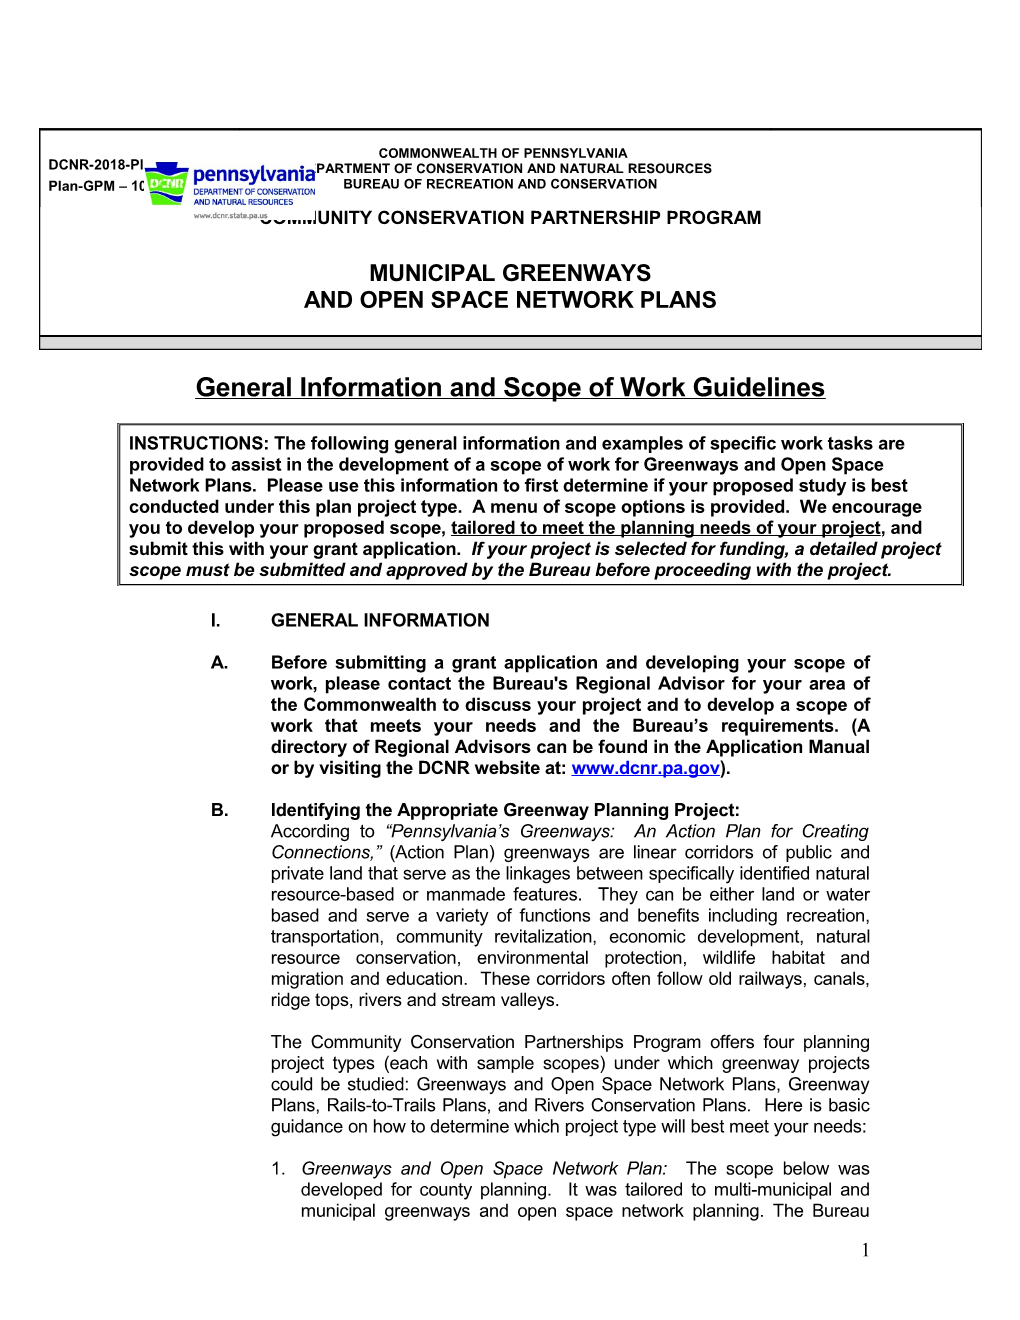 General Information and Scope of Work Guidelines s1